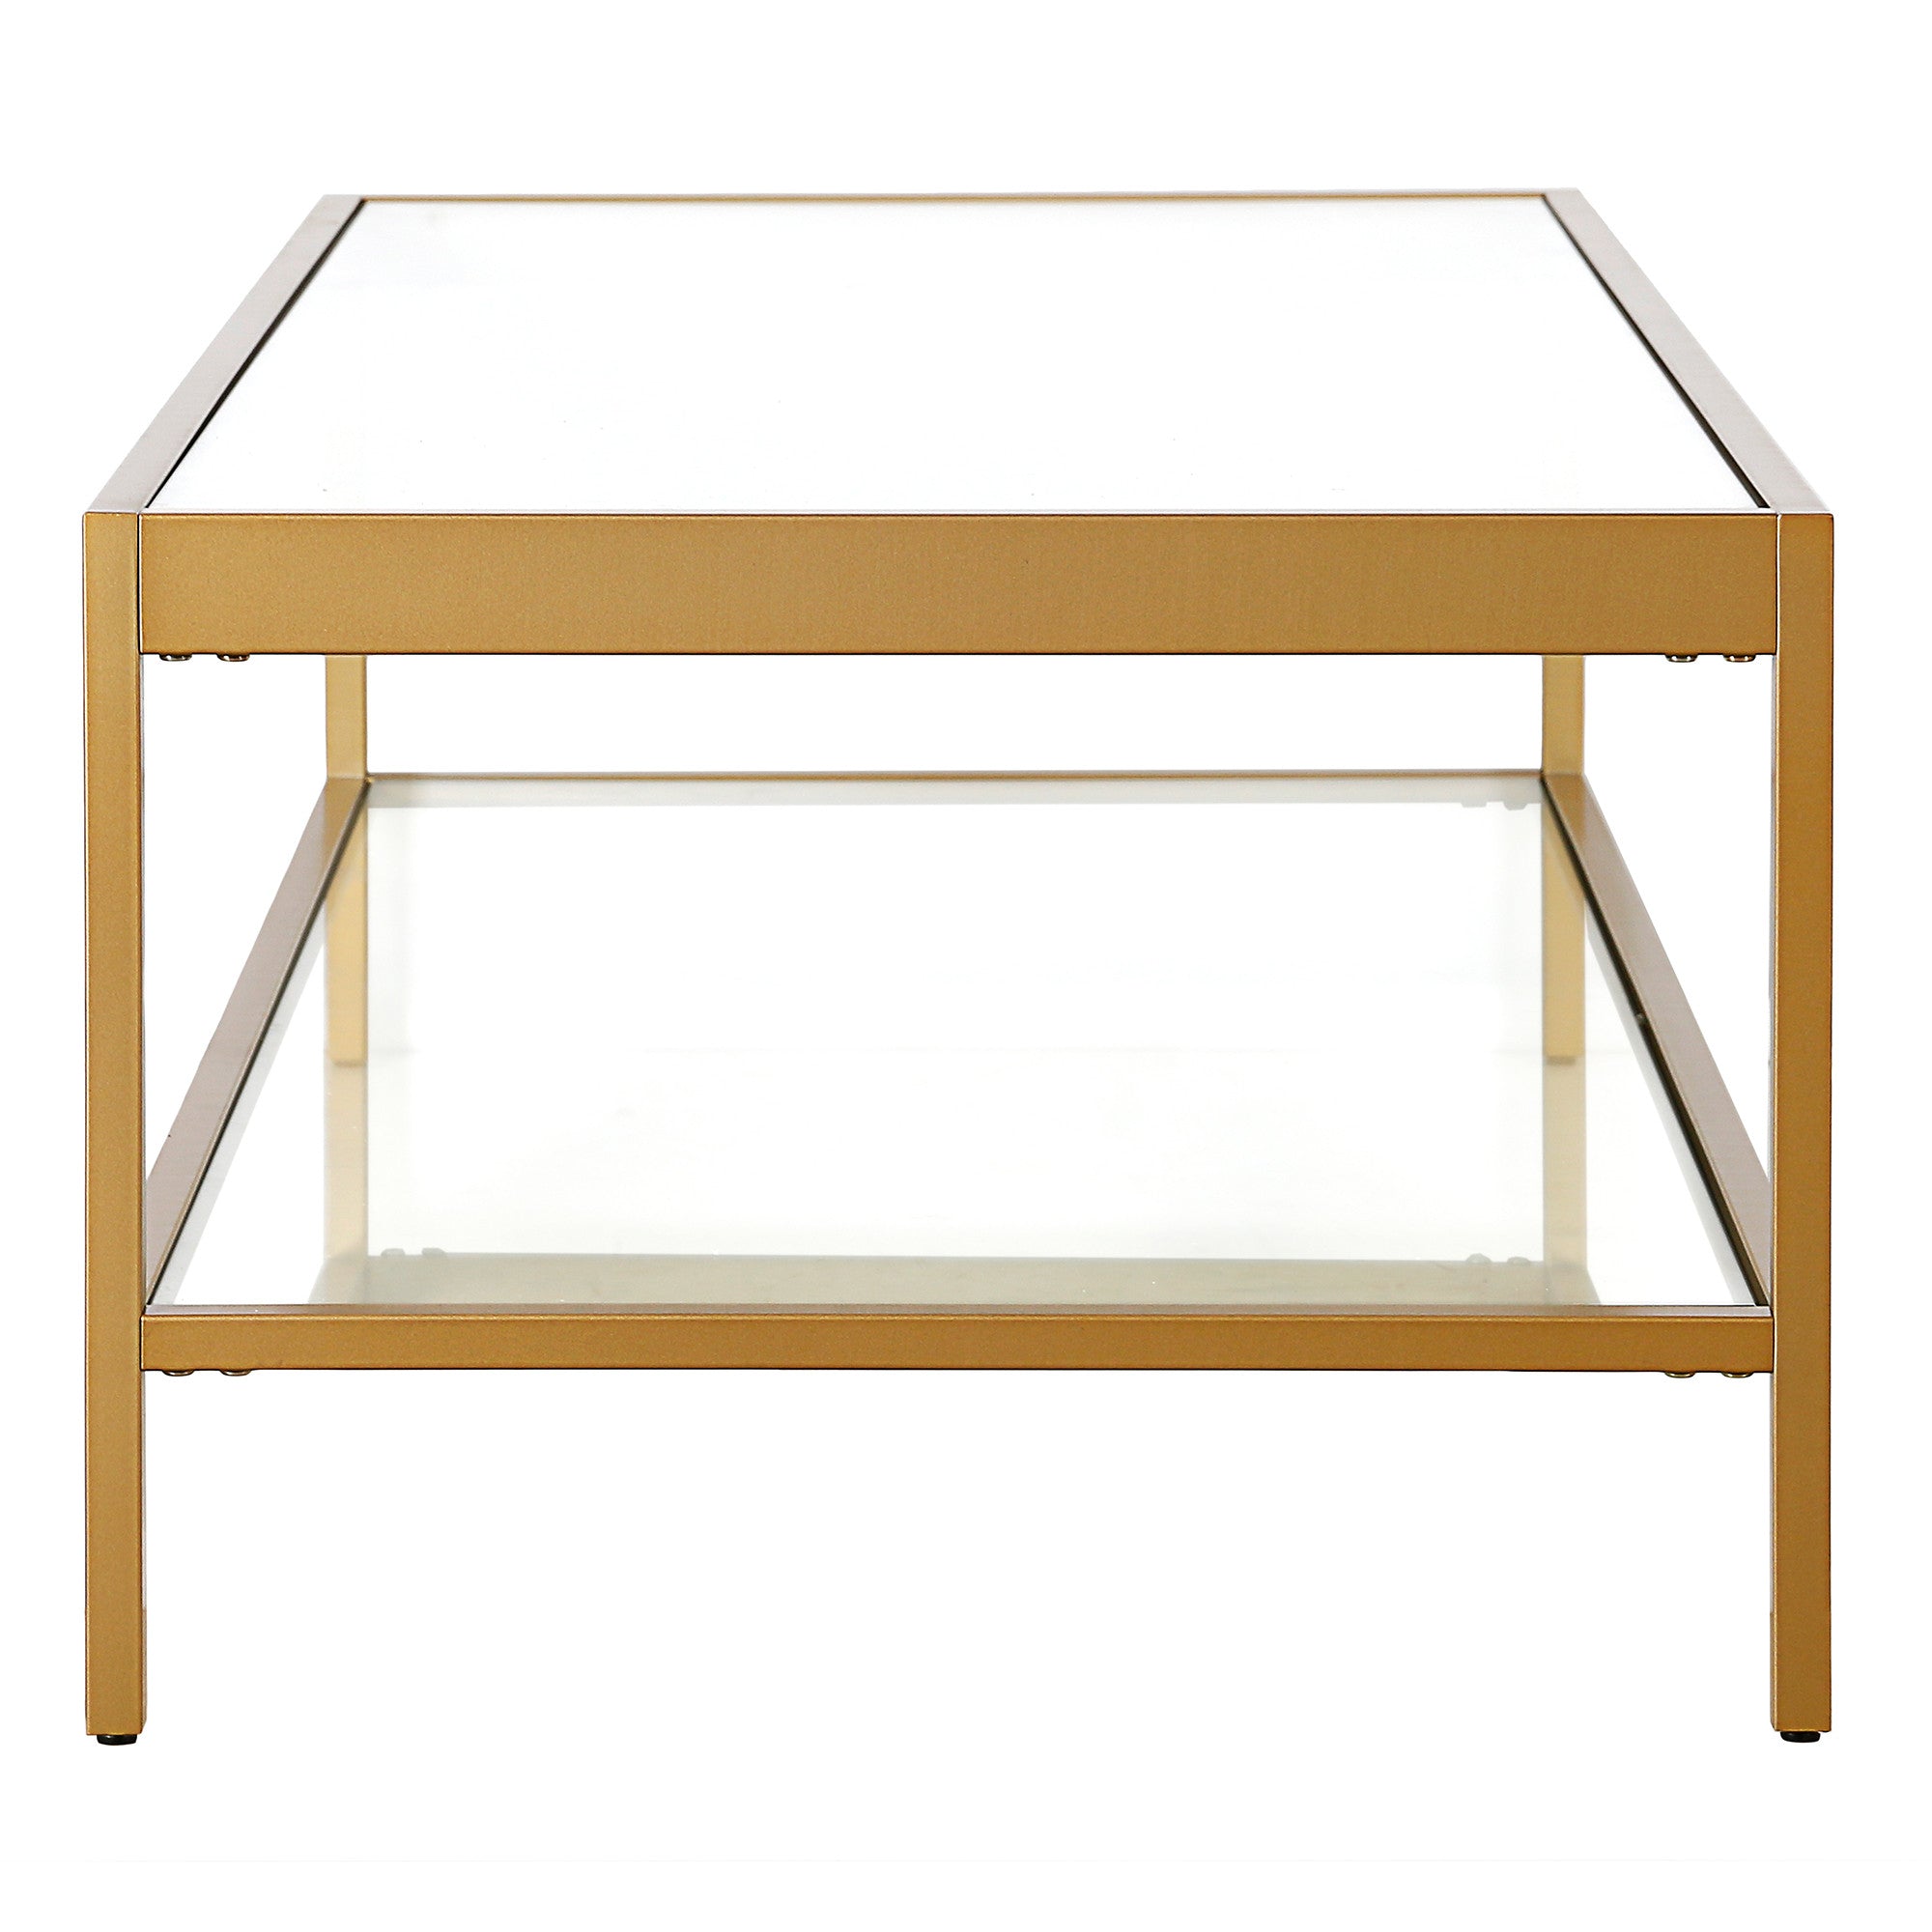 54" Gold Glass And Steel Coffee Table With Shelf